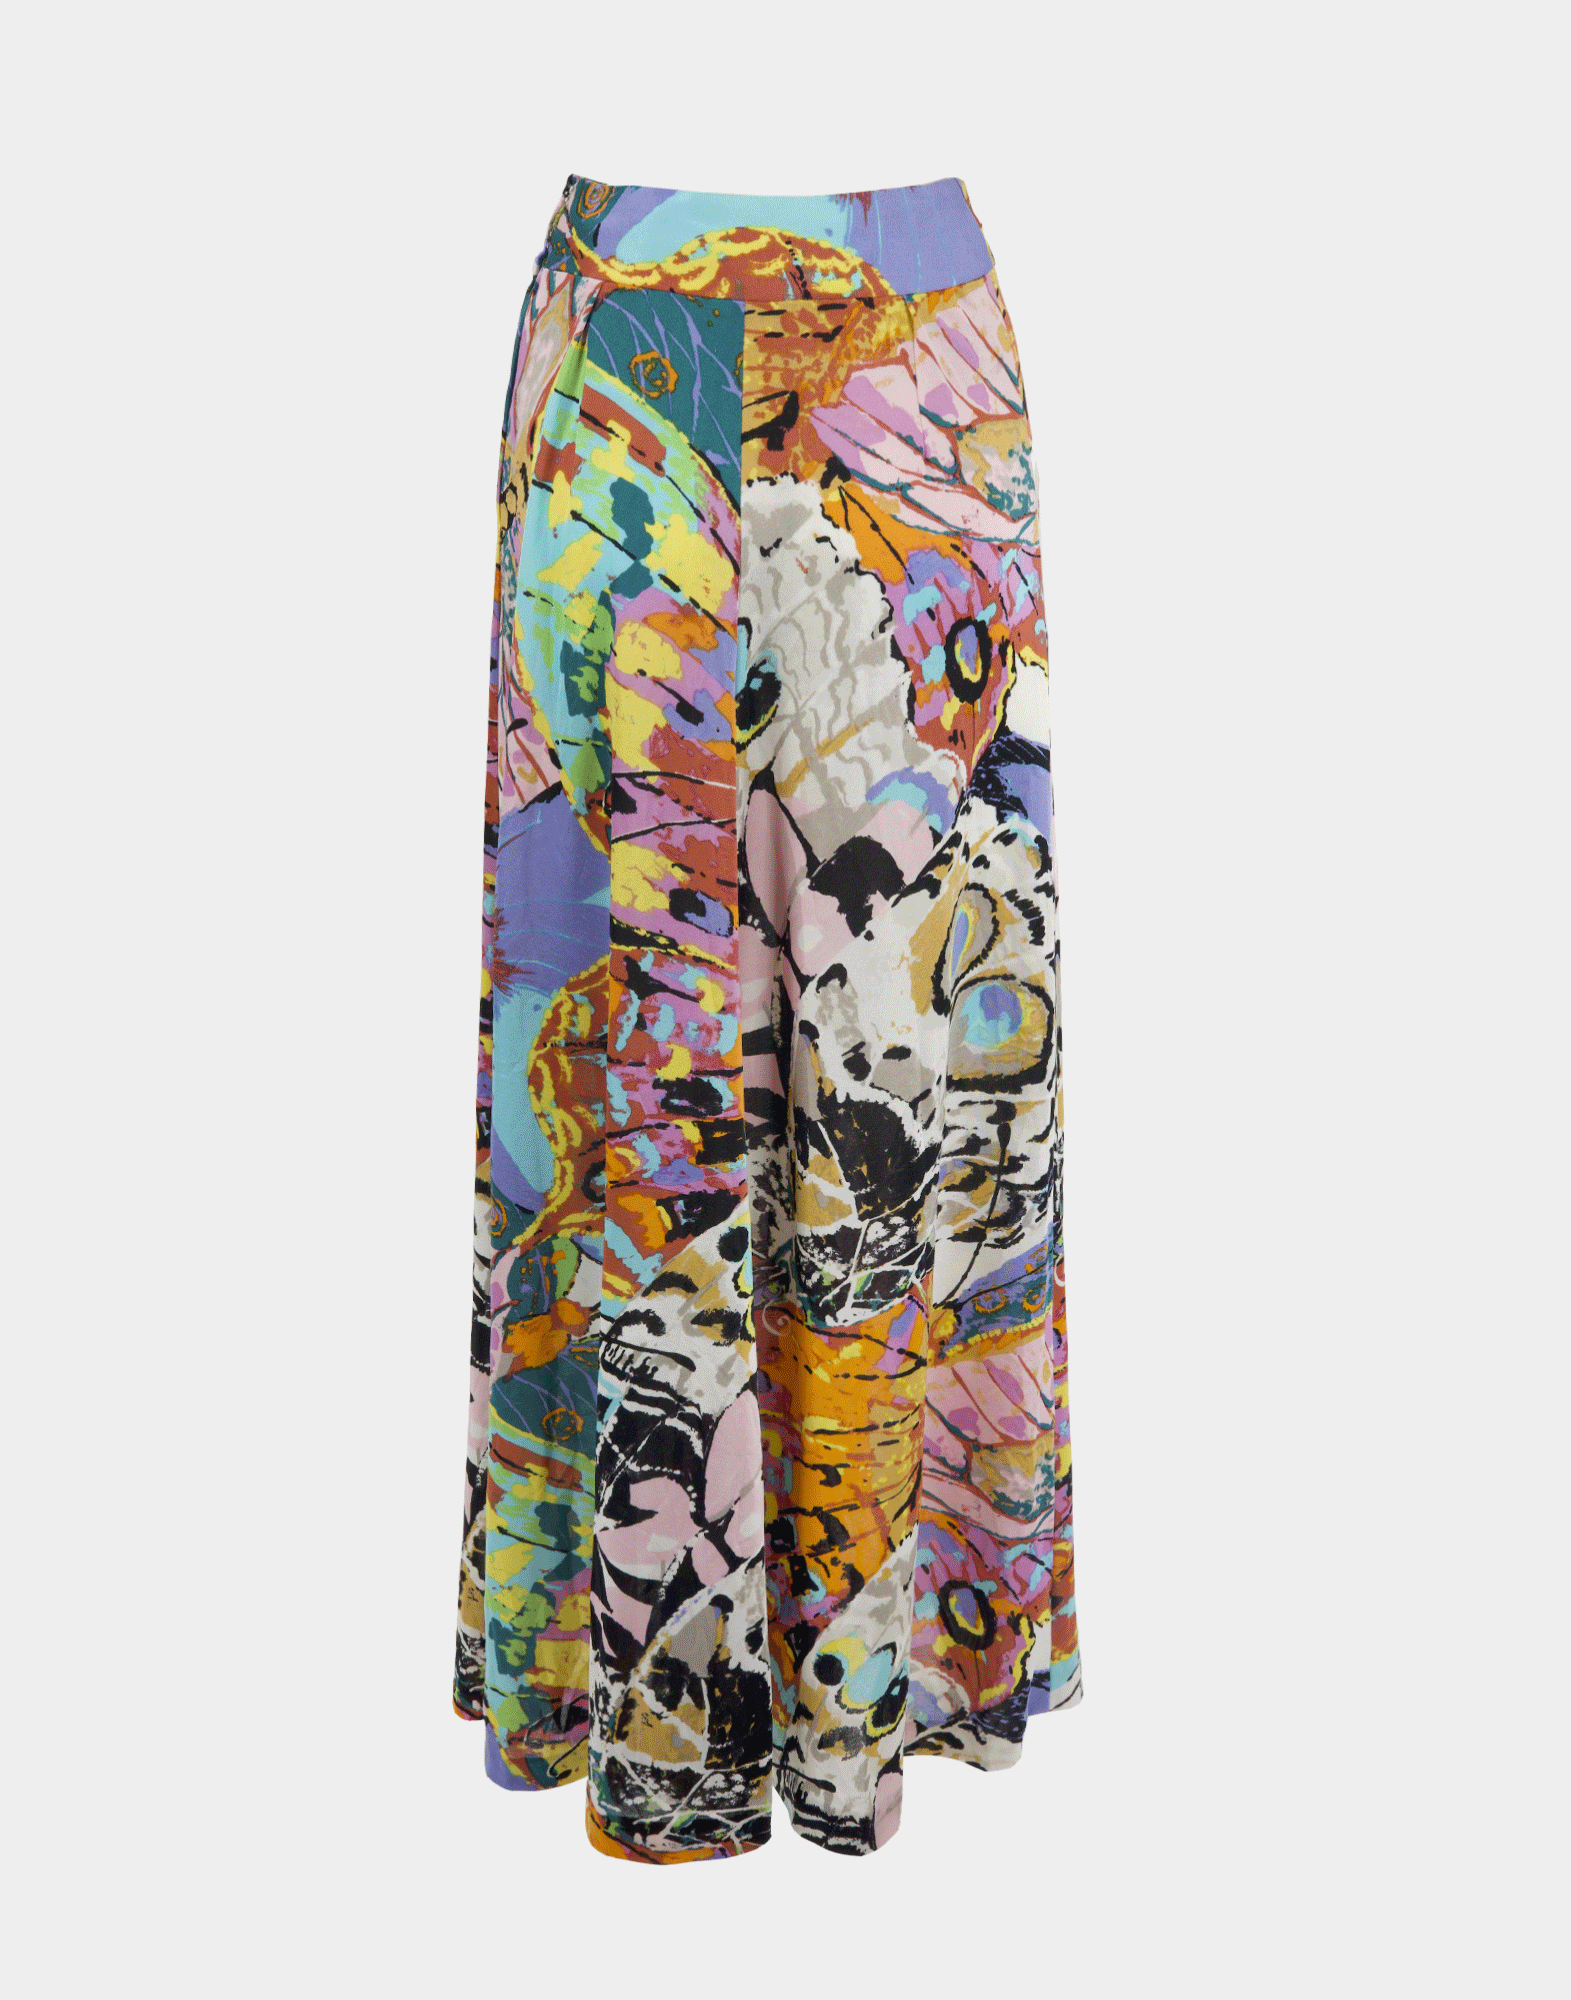 Women's long skirt with a floral pattern